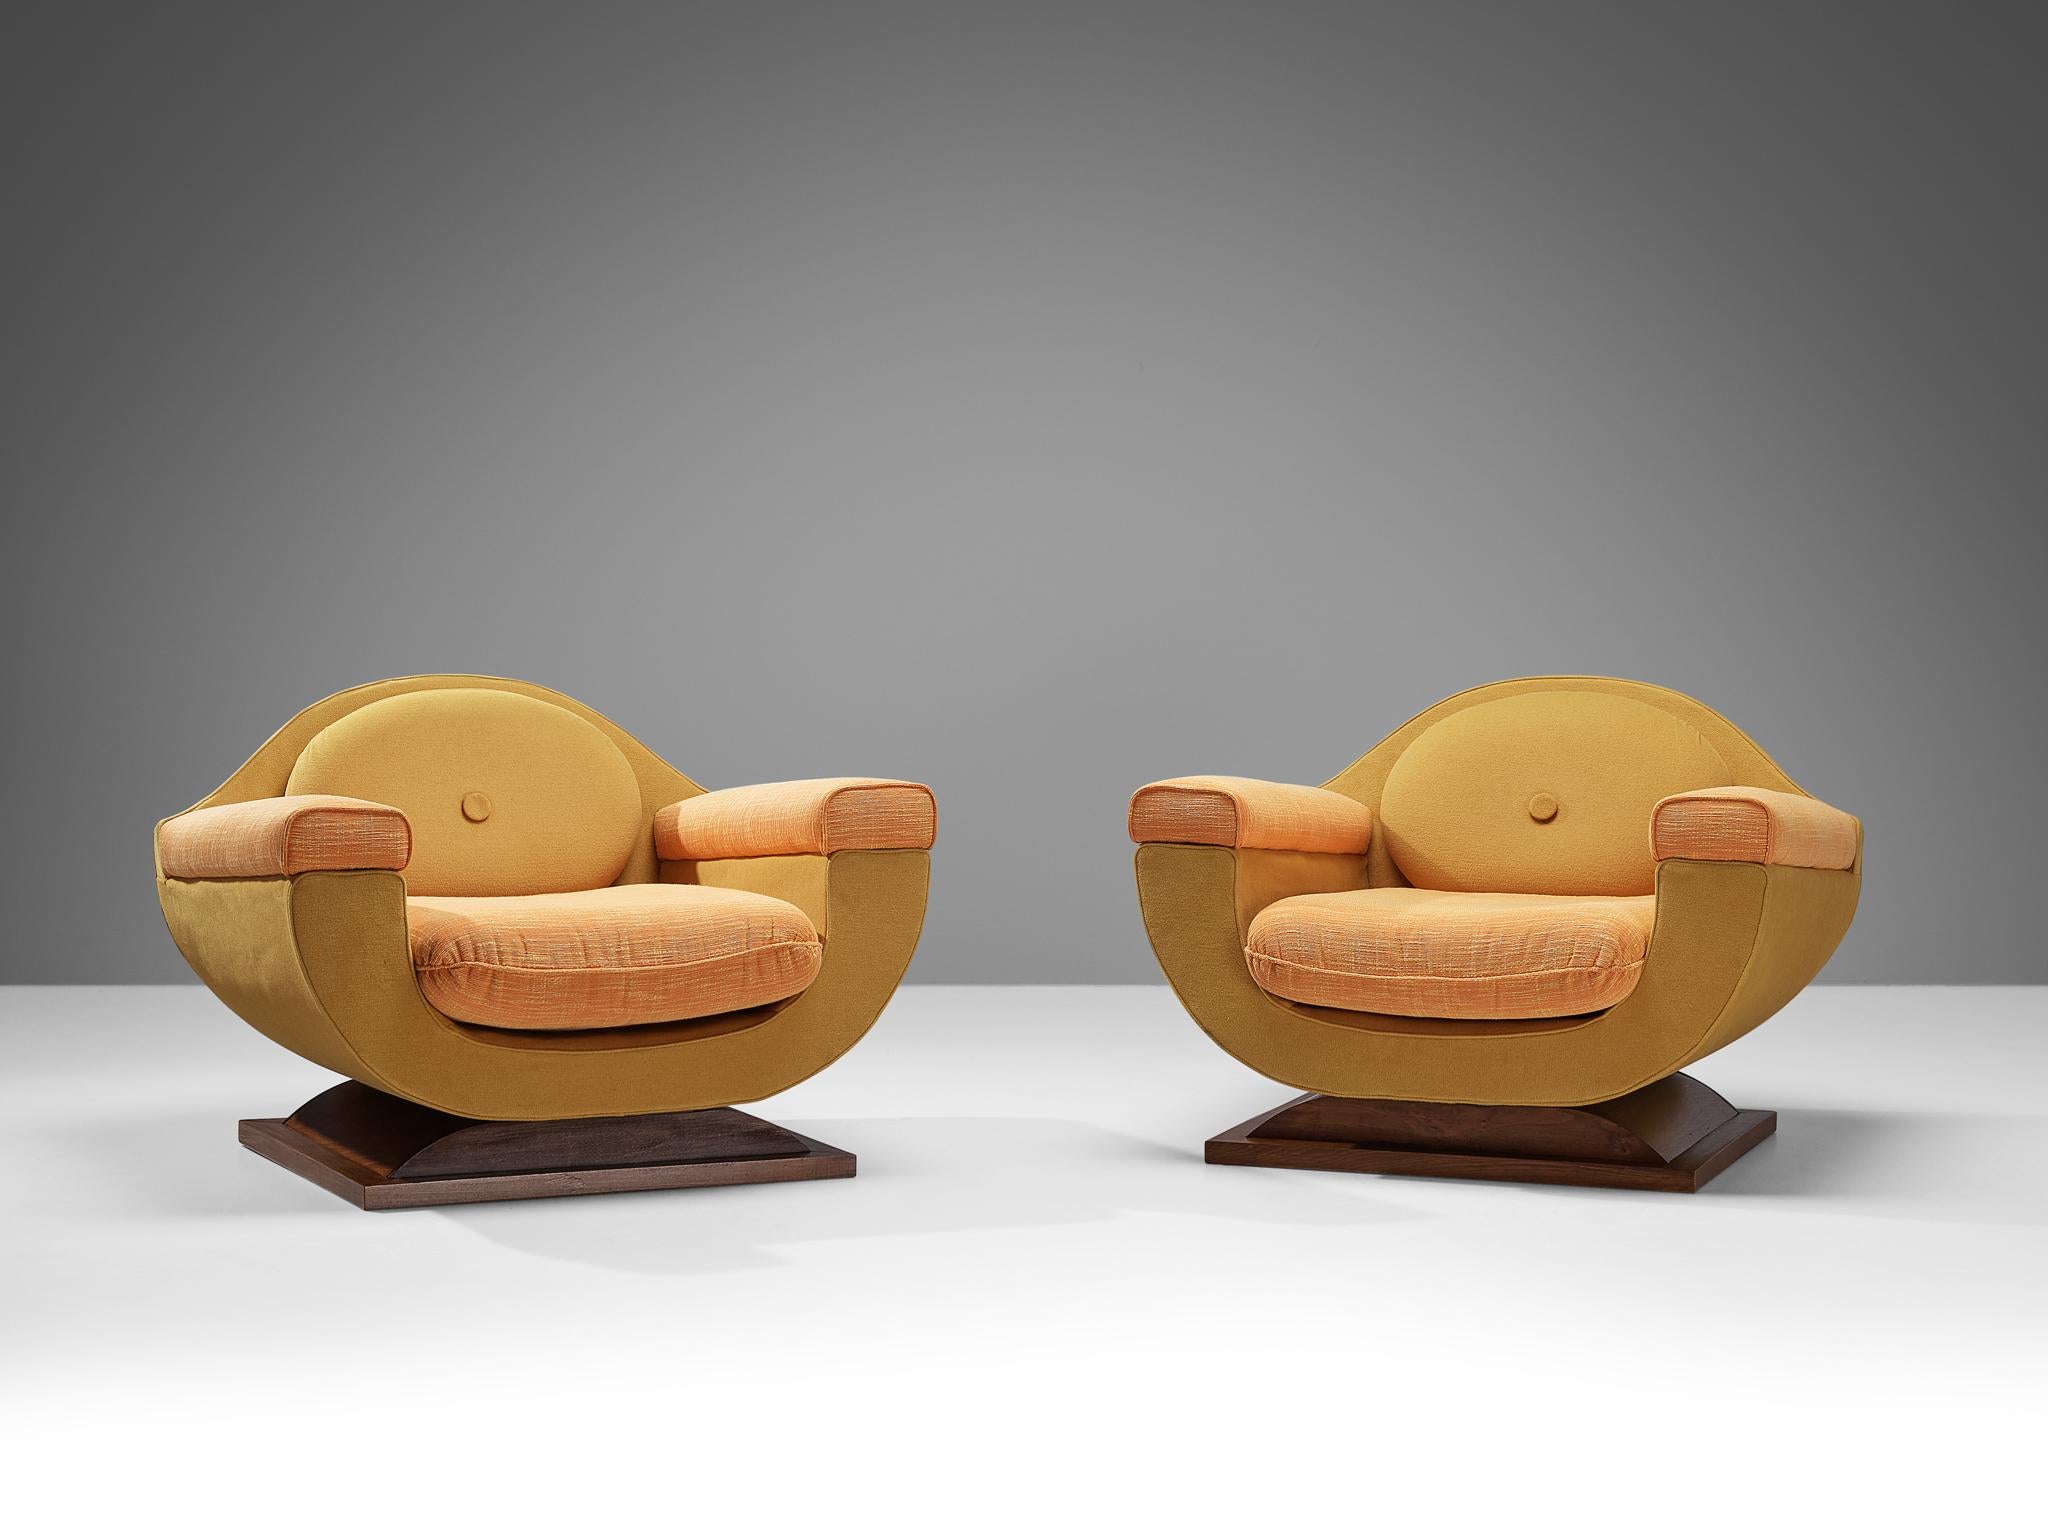 Pair of lounge chairs, fabric, stained walnut, Italy, 1940s

These exquisite lounge chairs are quintessential examples of Italian Art Deco design, known for its sleek, streamlined curves and emphasis on geometric forms. With their charmingly bulky